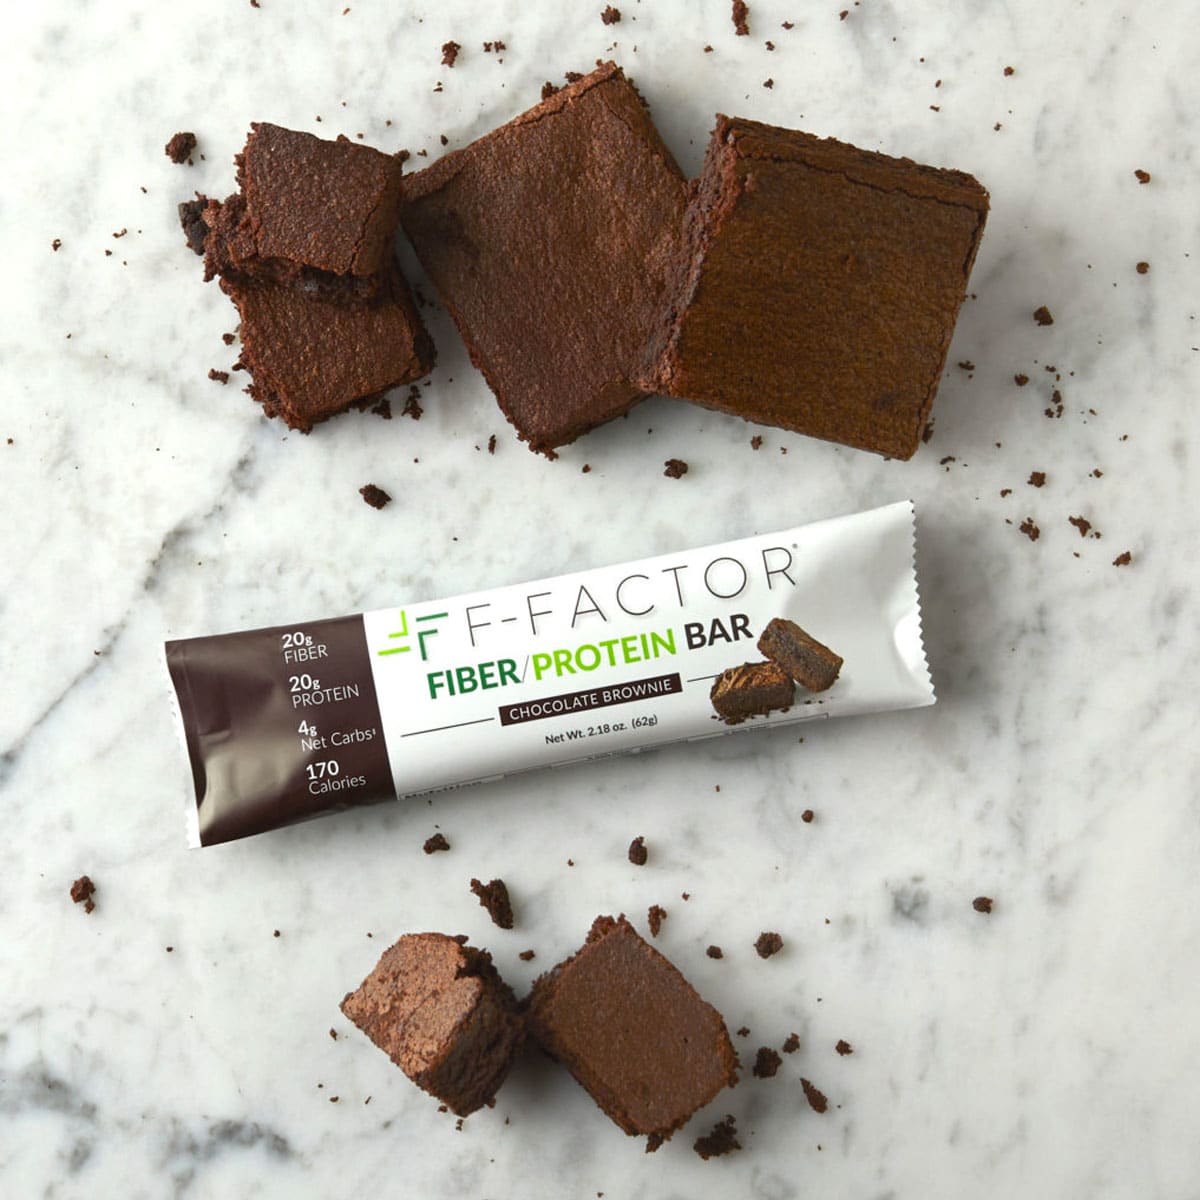 F-Factor Fiber/Protein Bar (Chocolate Brownie – 12 Pack)